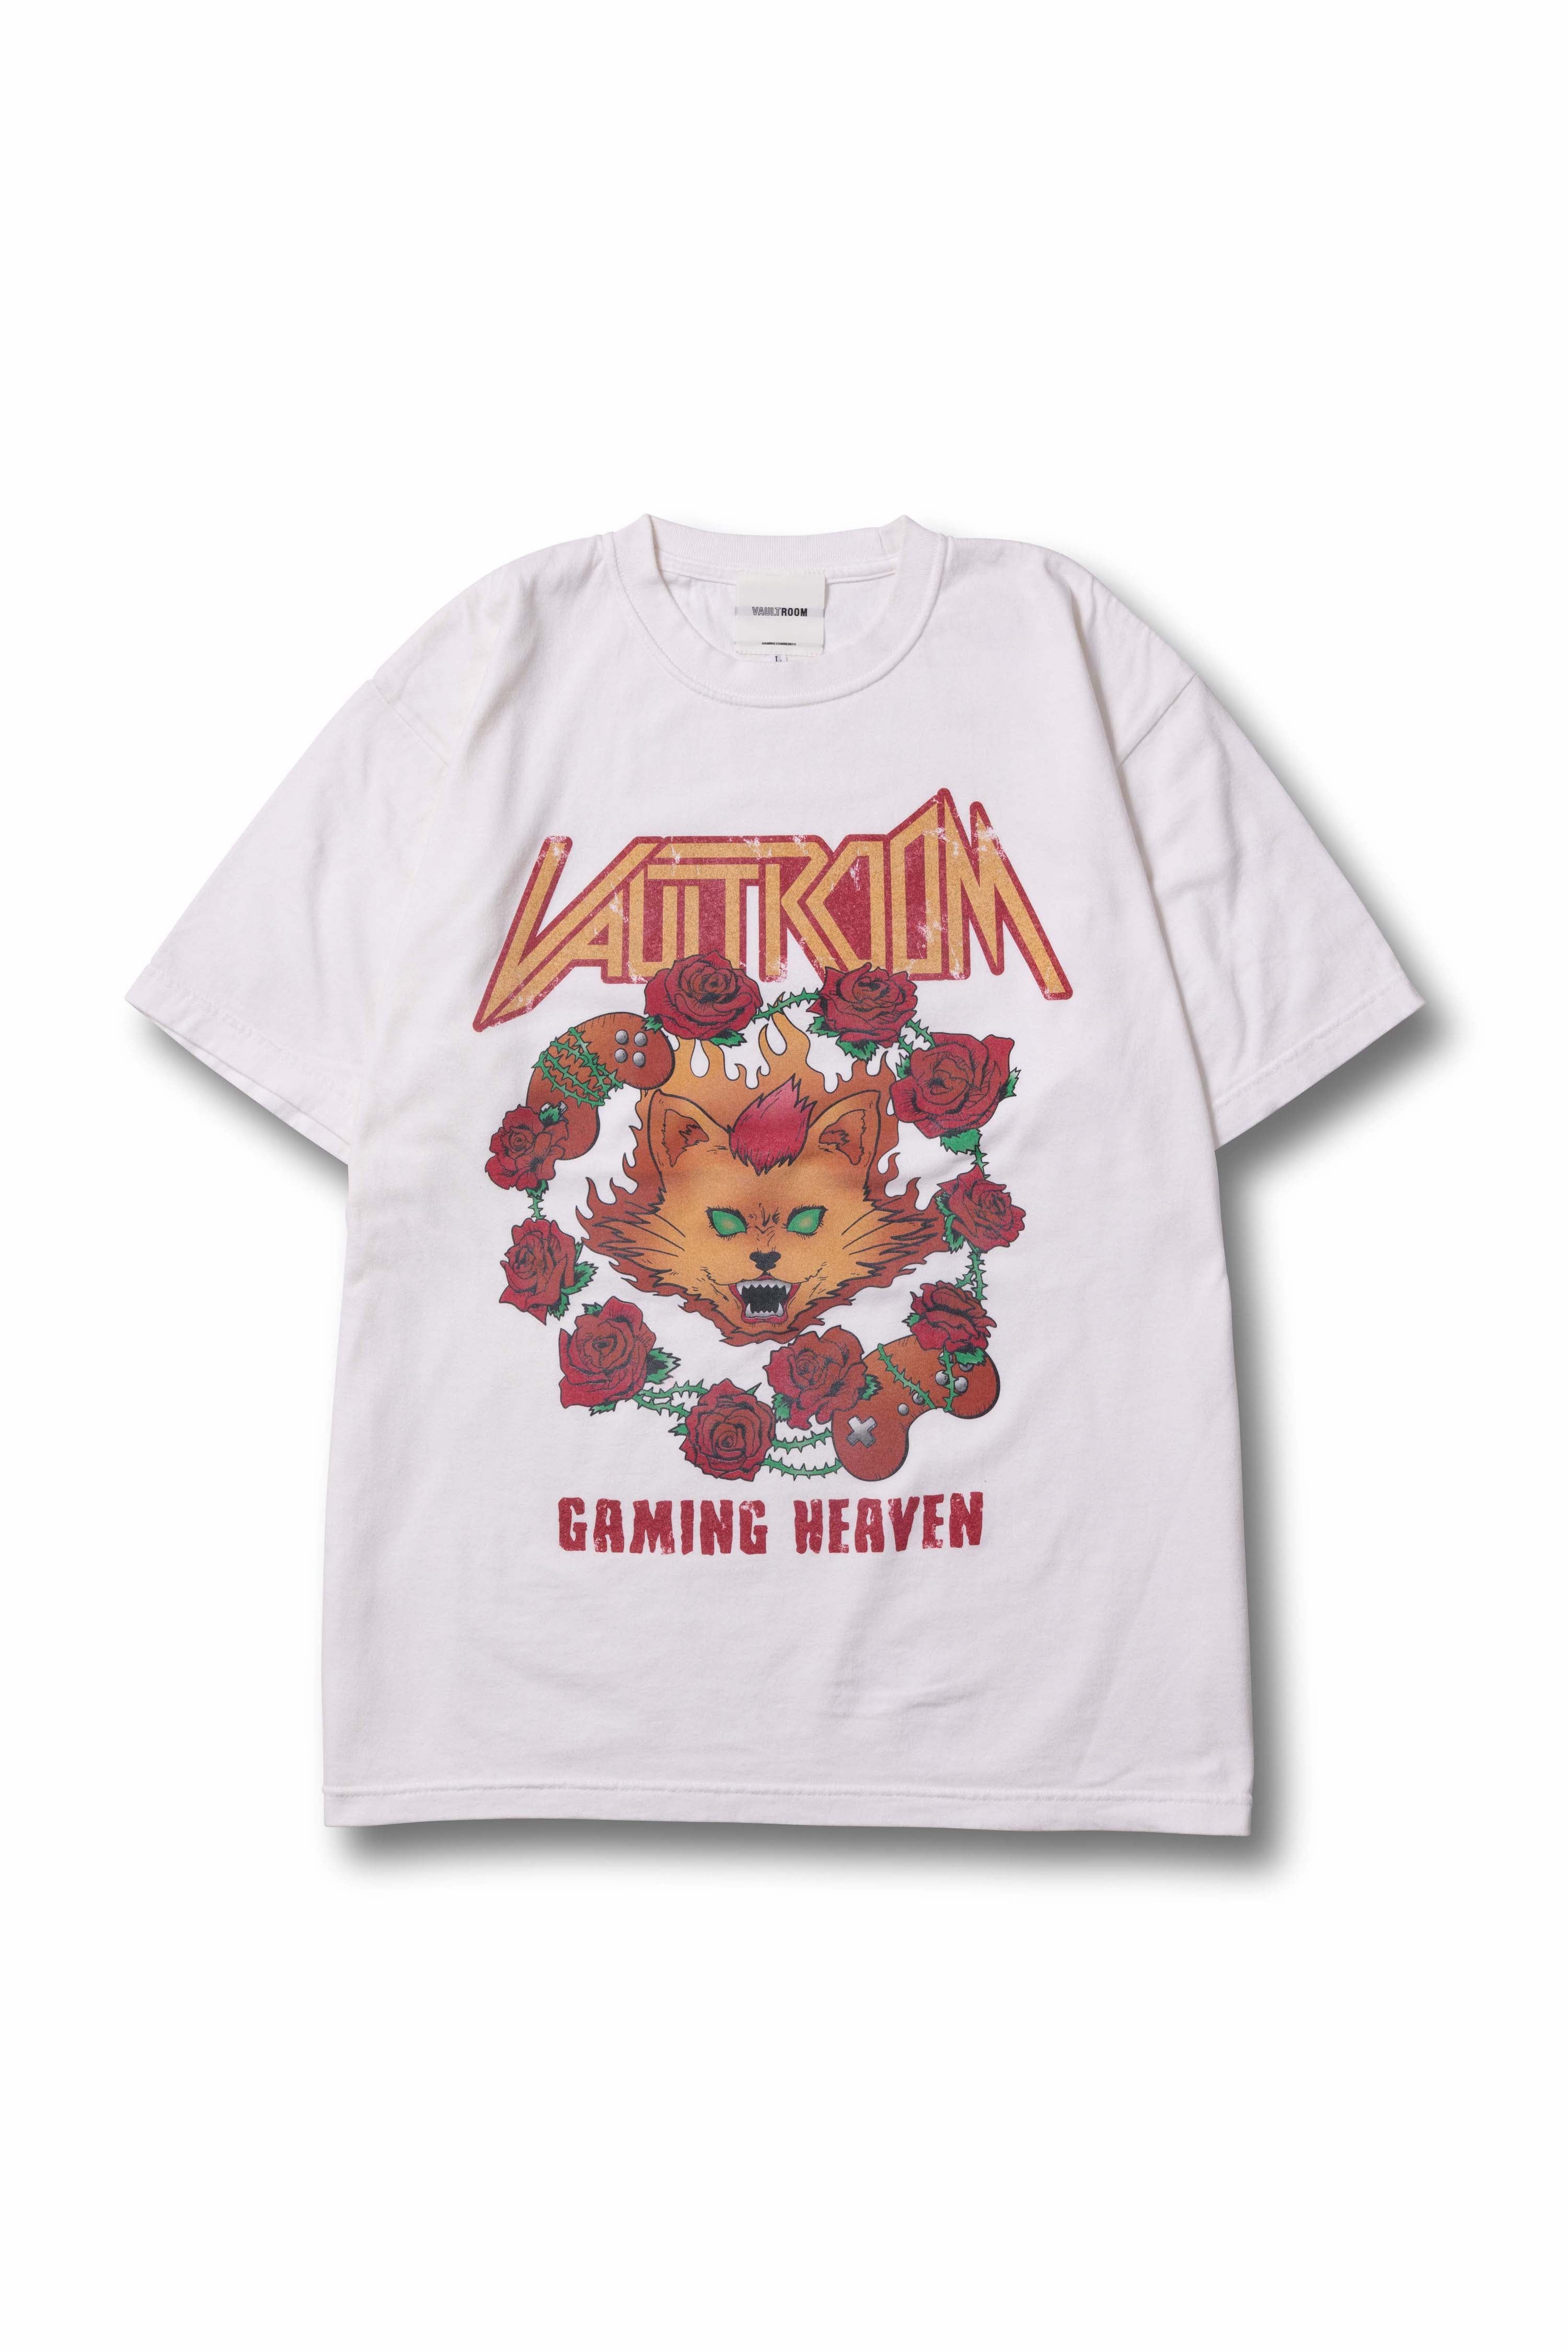 vaultroom GAMING HEAVEN TEE / OFF WHITE - Tシャツ/カットソー(半袖